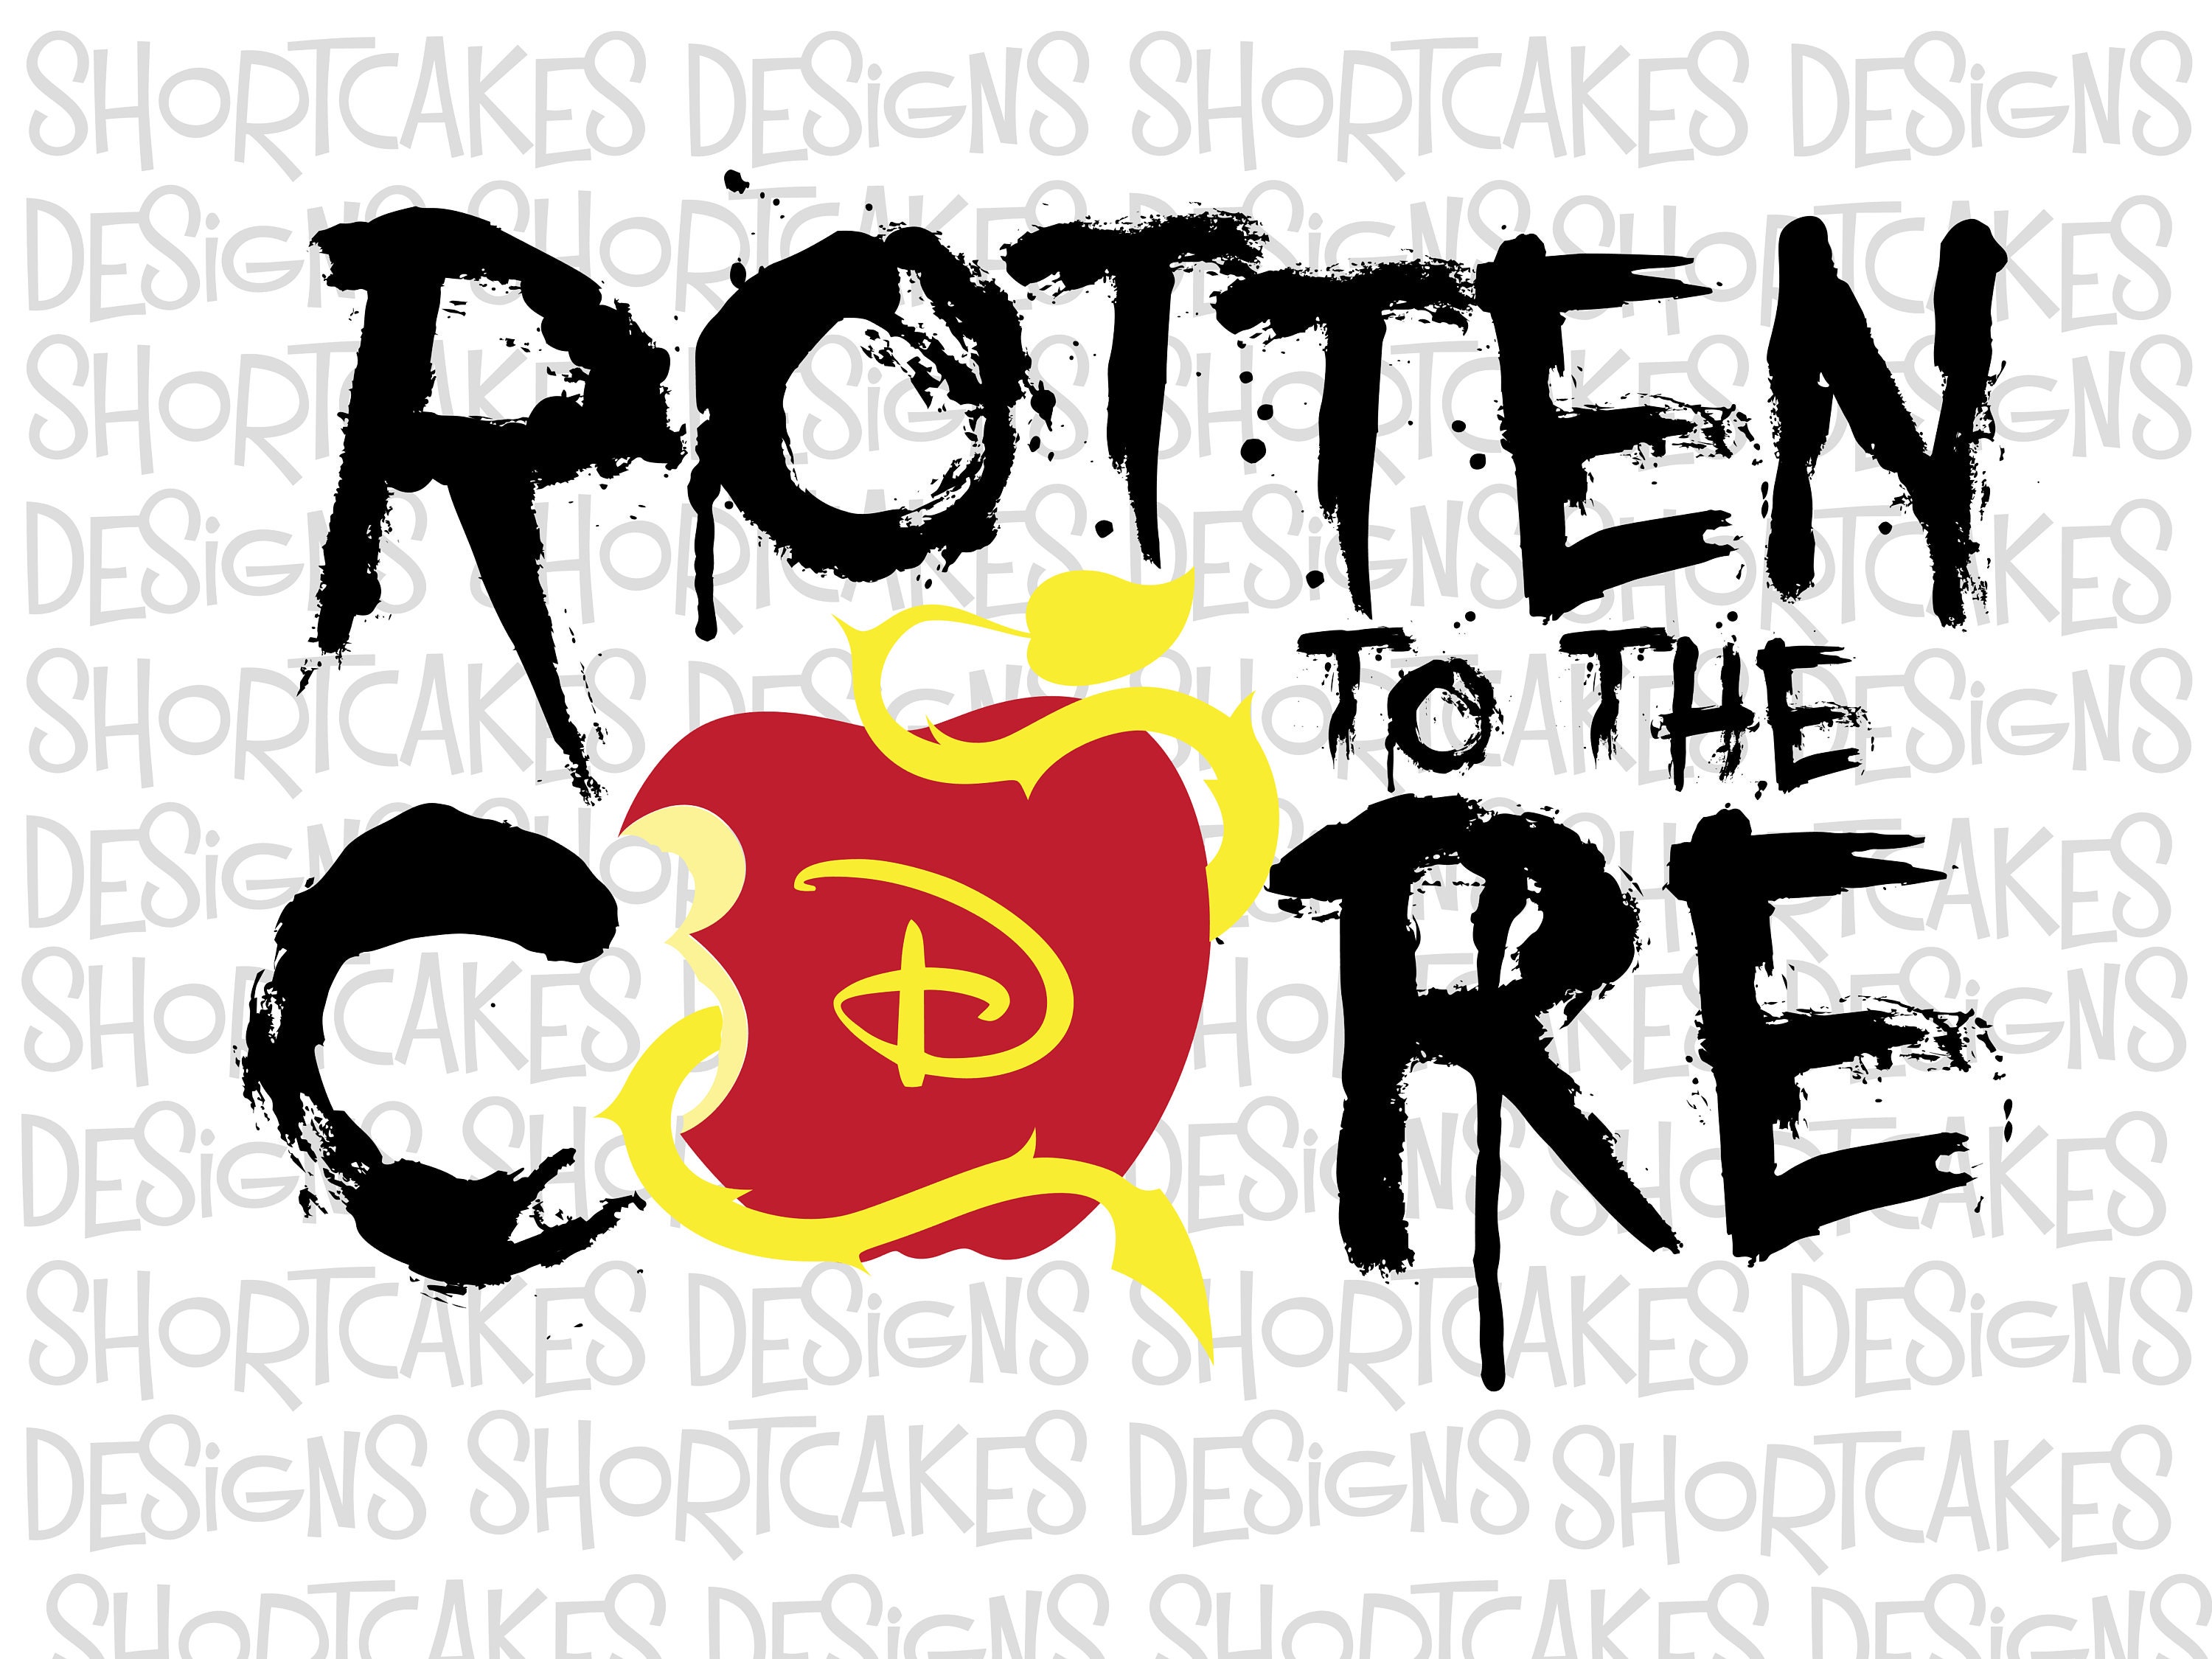 Rotten to the Core - Descendants-themed SVG file - Instant Download